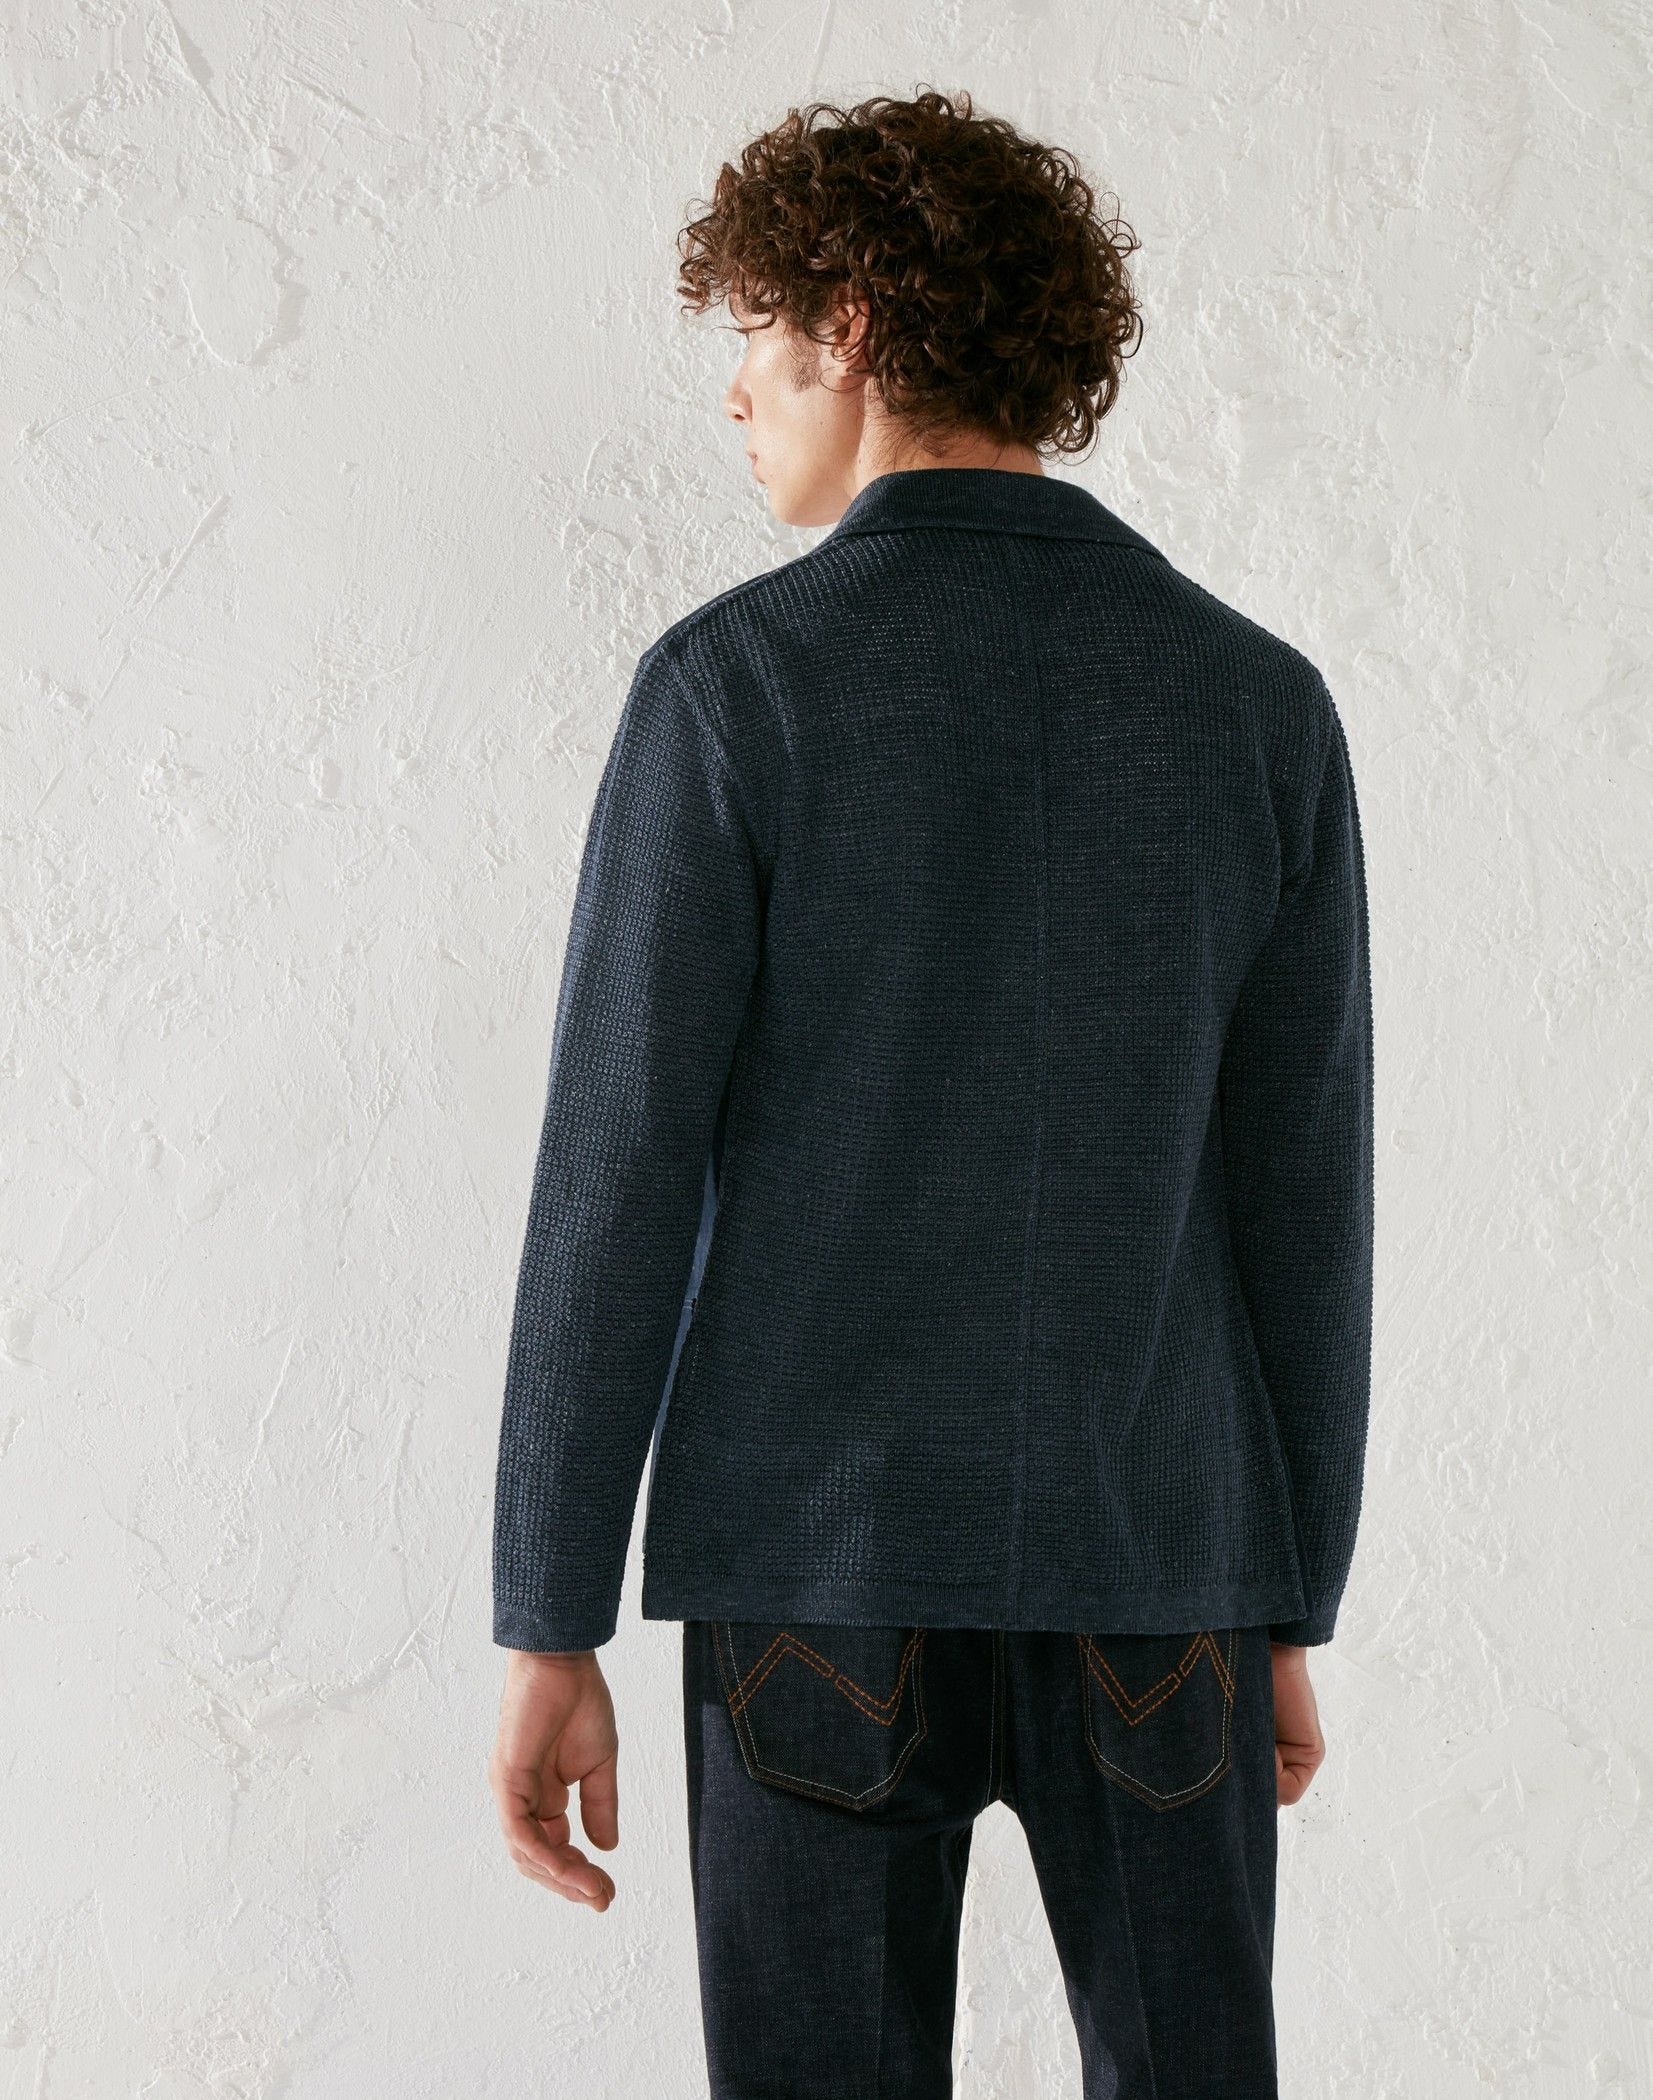 Linen knit jacket with leather inserts